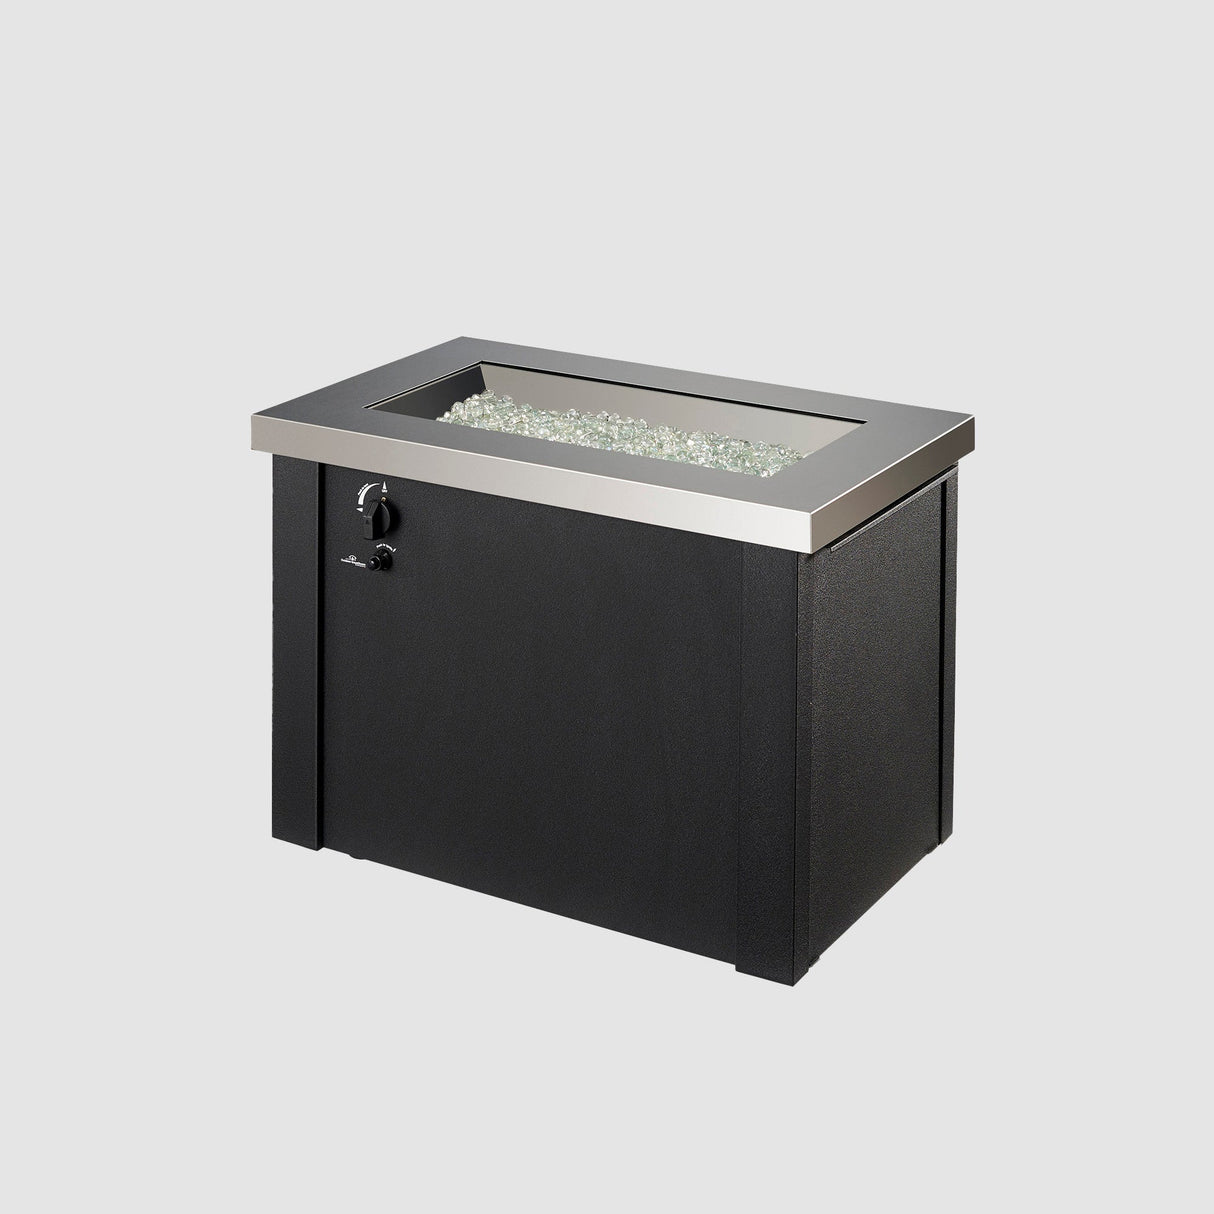 Providence Rectangular Gas Fire Pit Table with fire media in the burner on a grey background